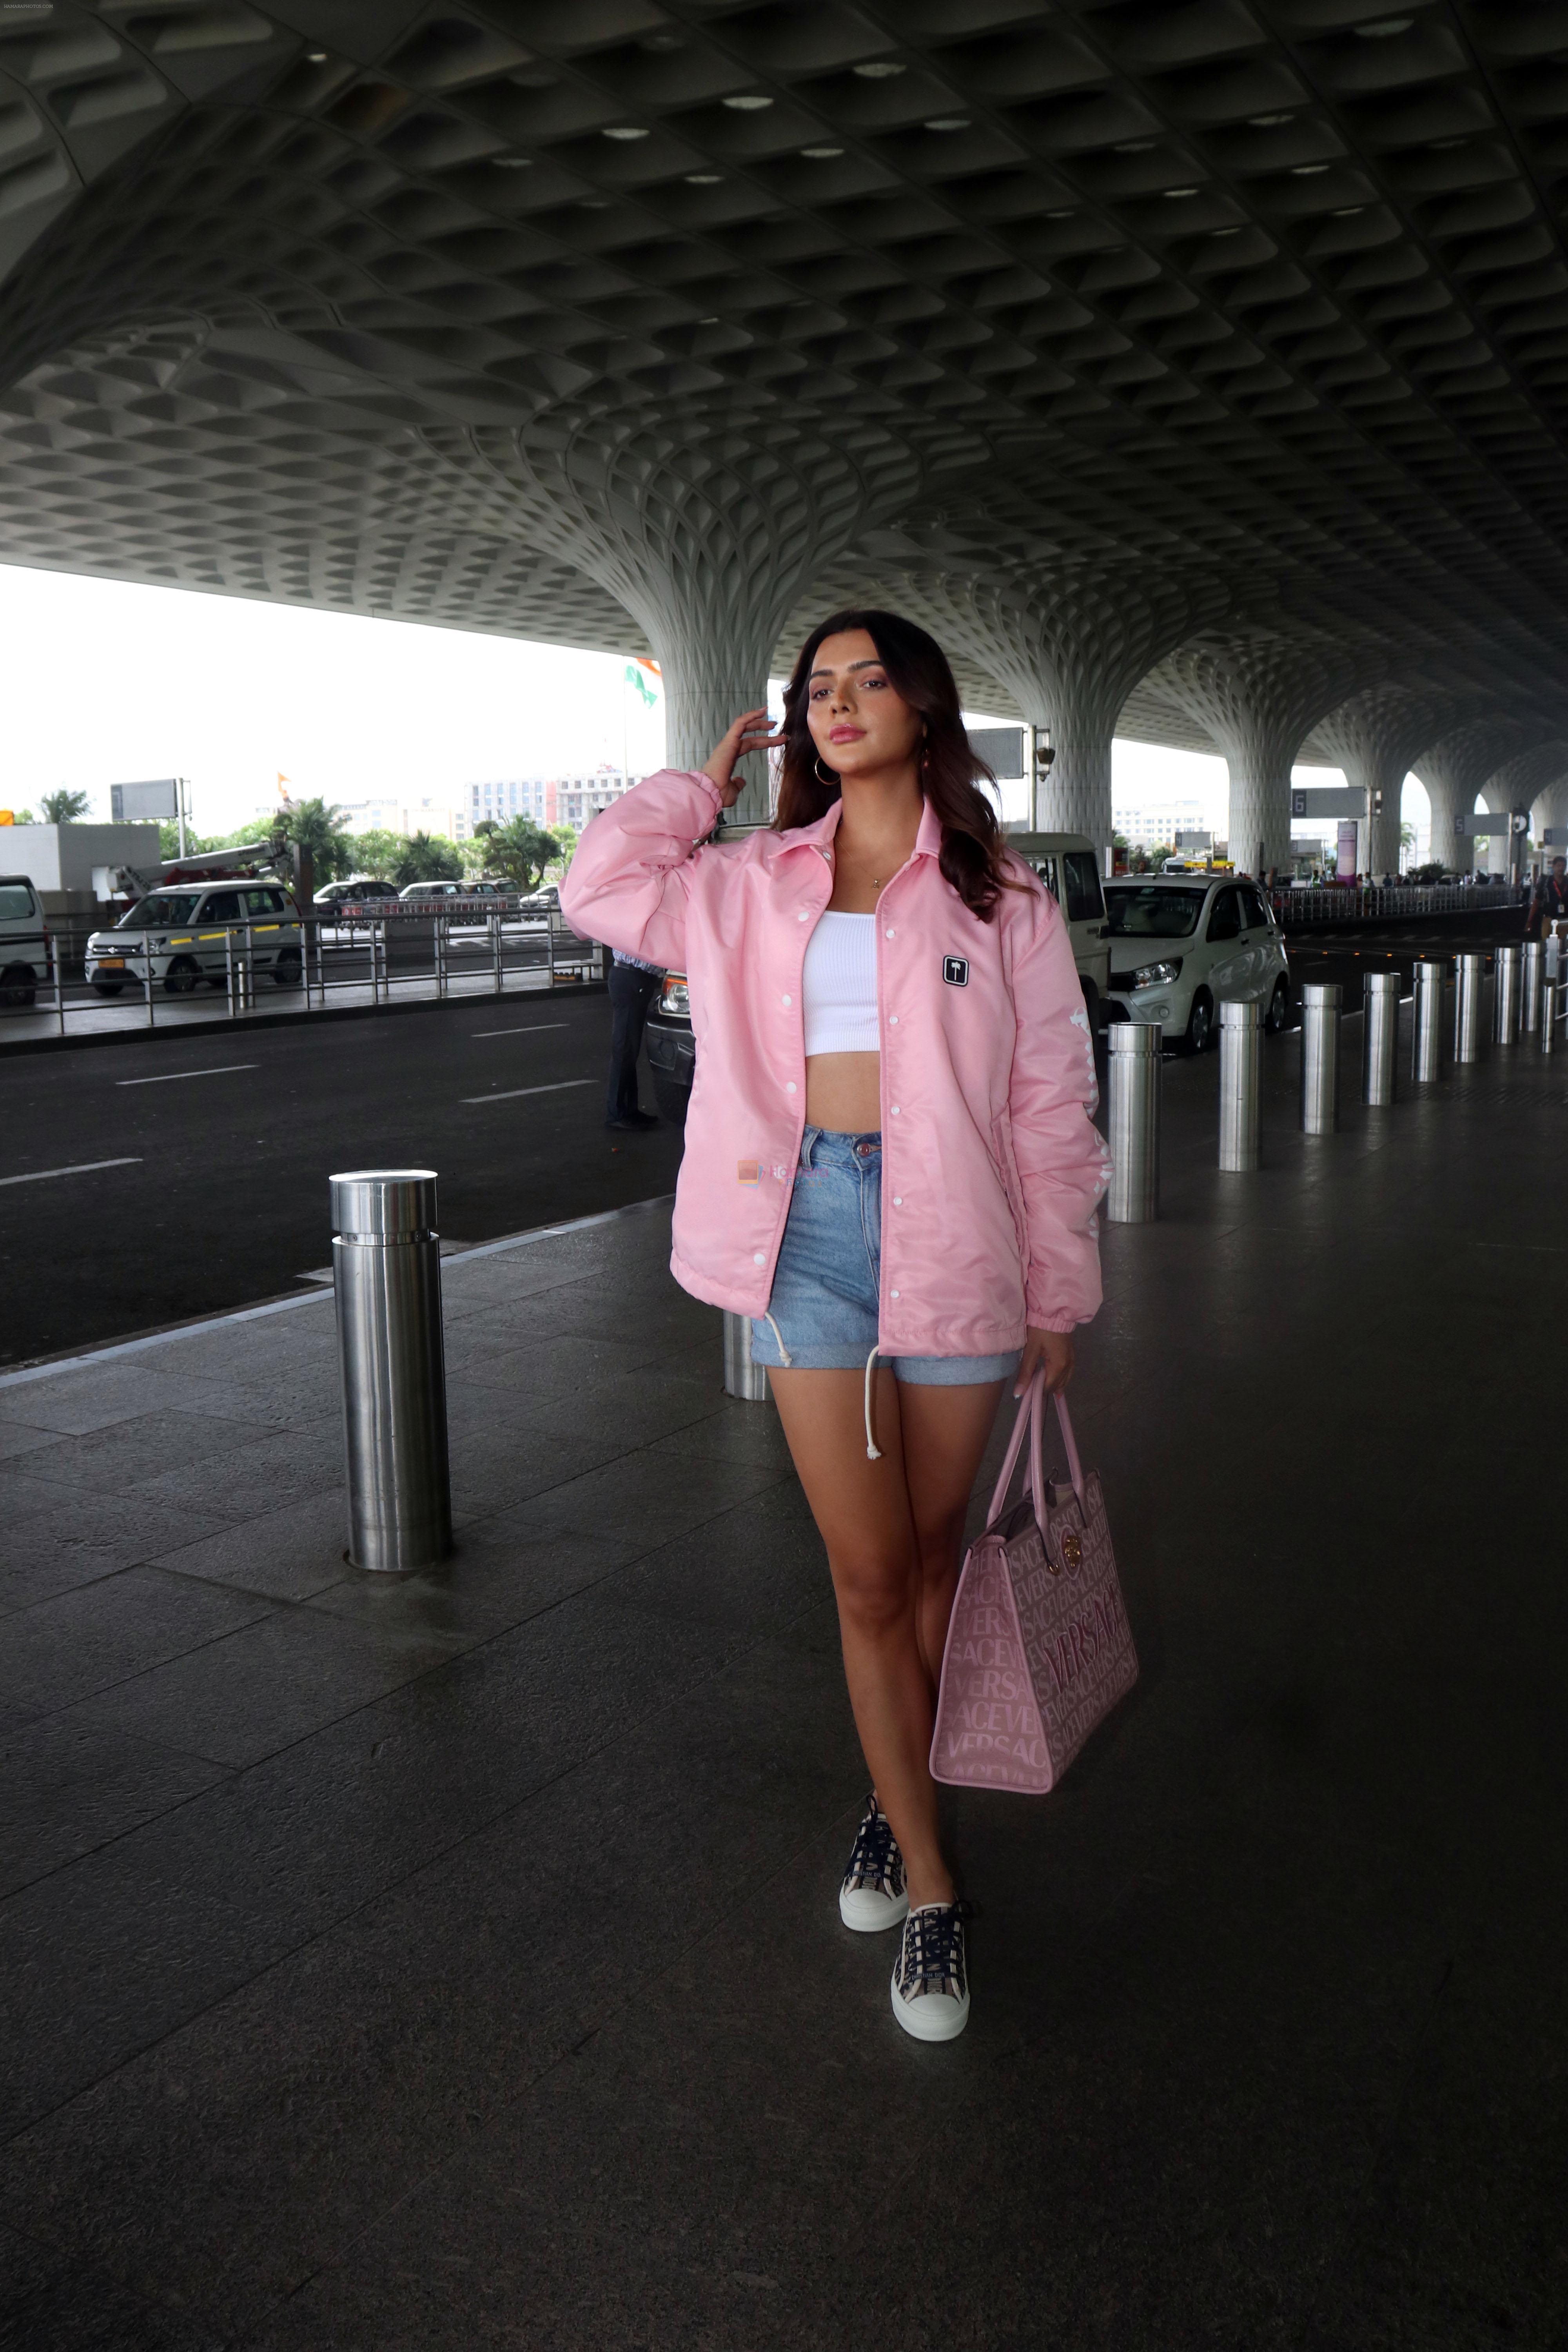 Ruhi Singh seen at the airport in pink jacket and short jeans holding versace handbag on 11 July 2023